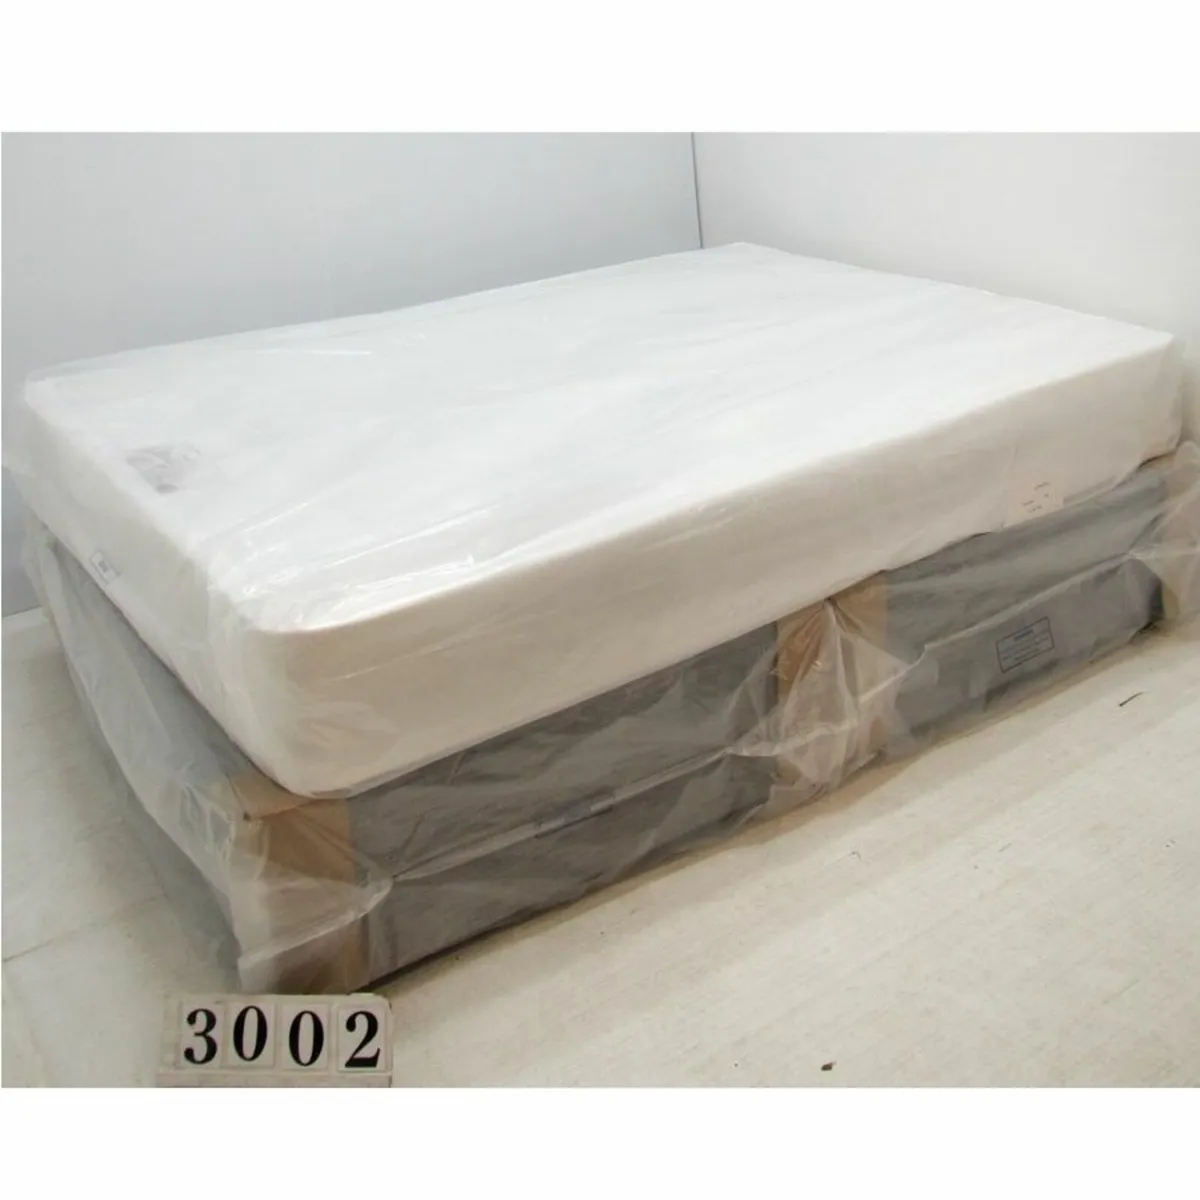 #3002  New Good Knight double bed and mattress